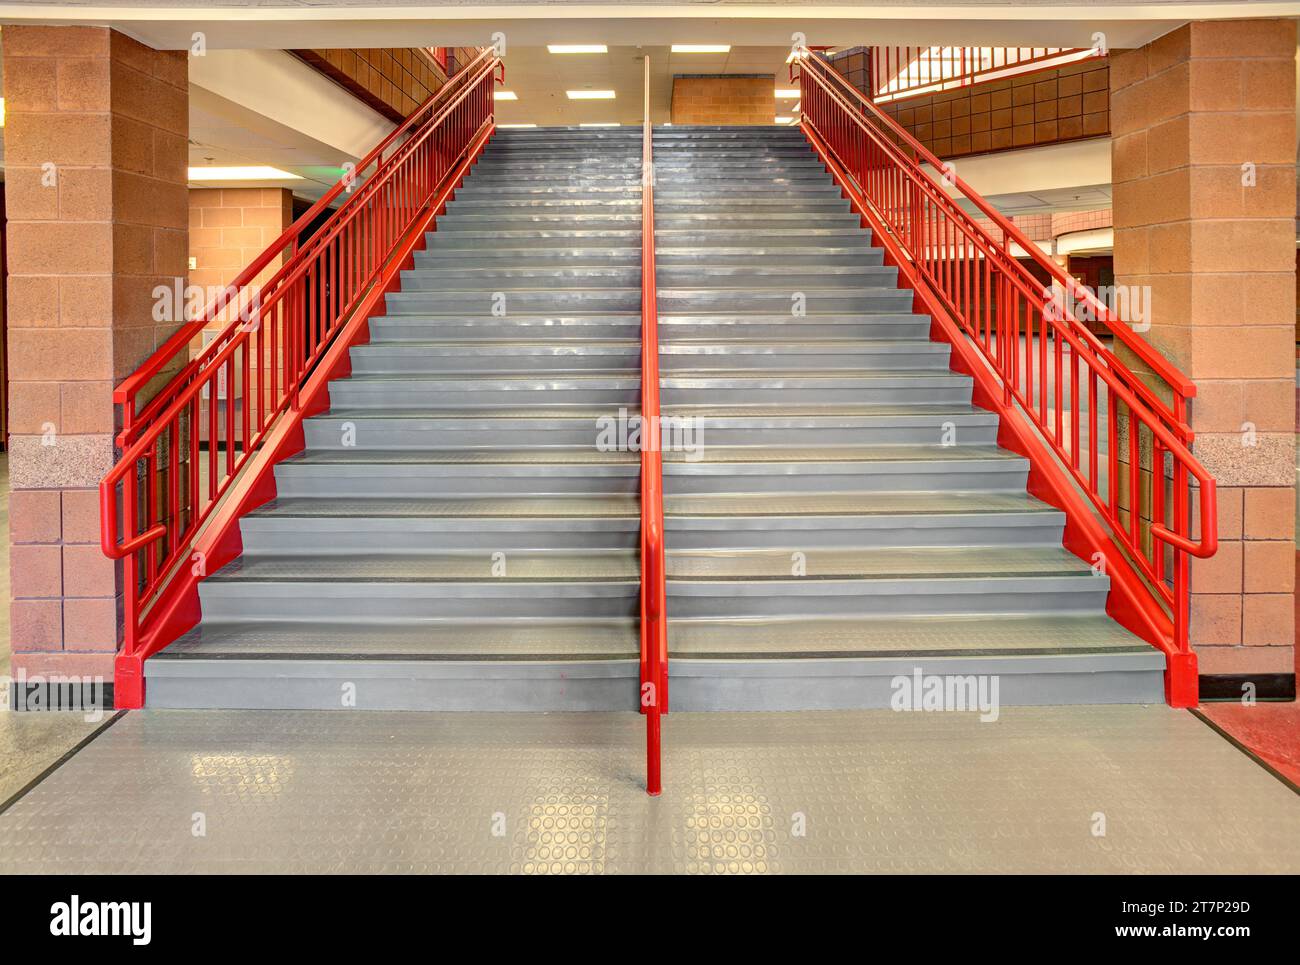 Anti slip floor treads and safety railings on the steps of an elementary school stairway. Stock Photo